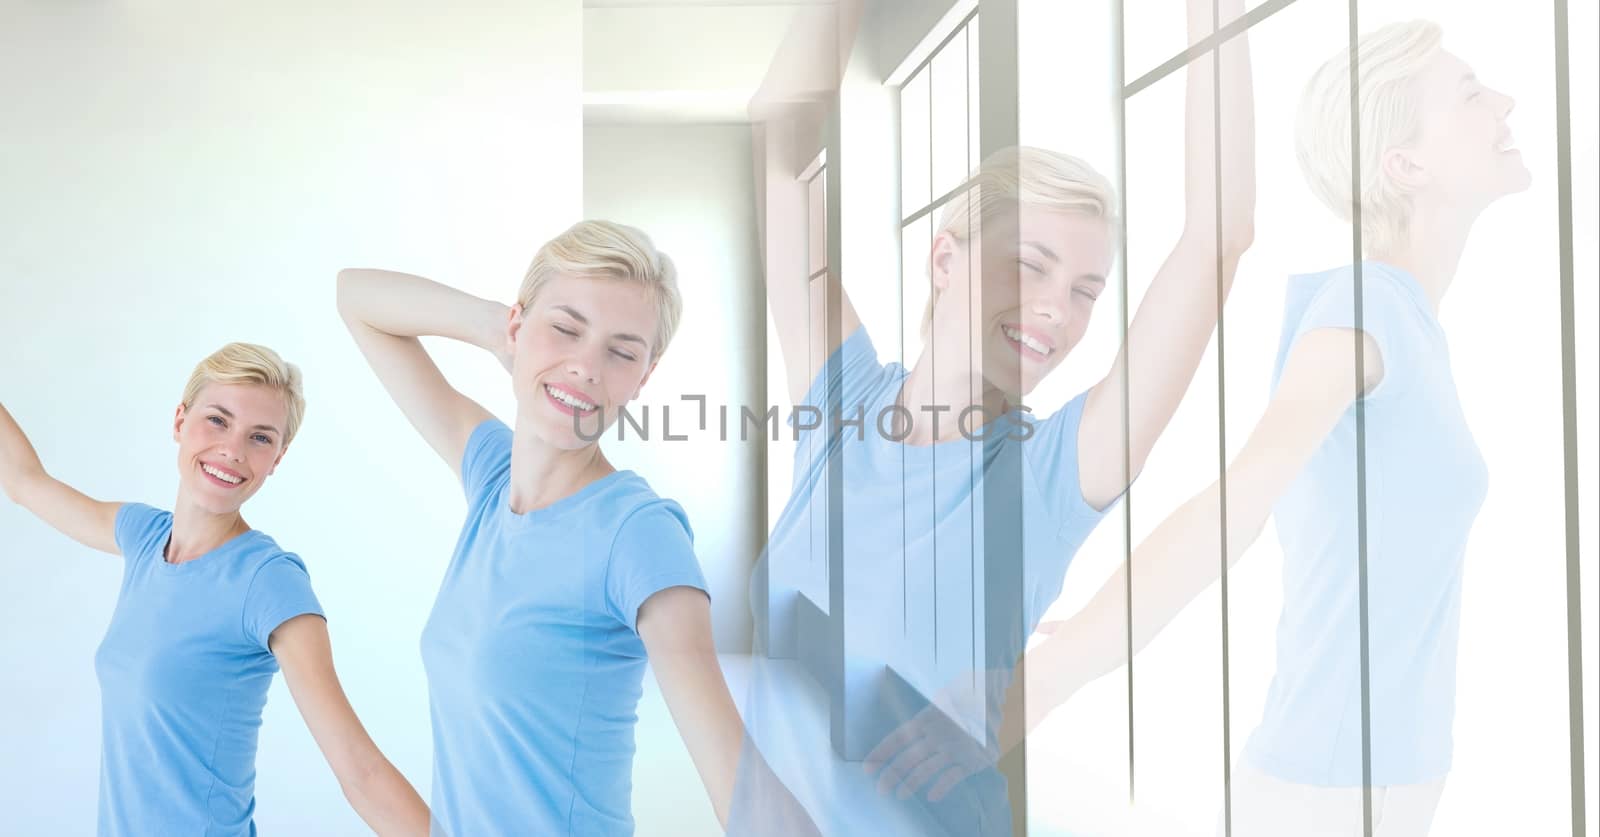 Digital composite of Woman exercising relaxing yoga by window